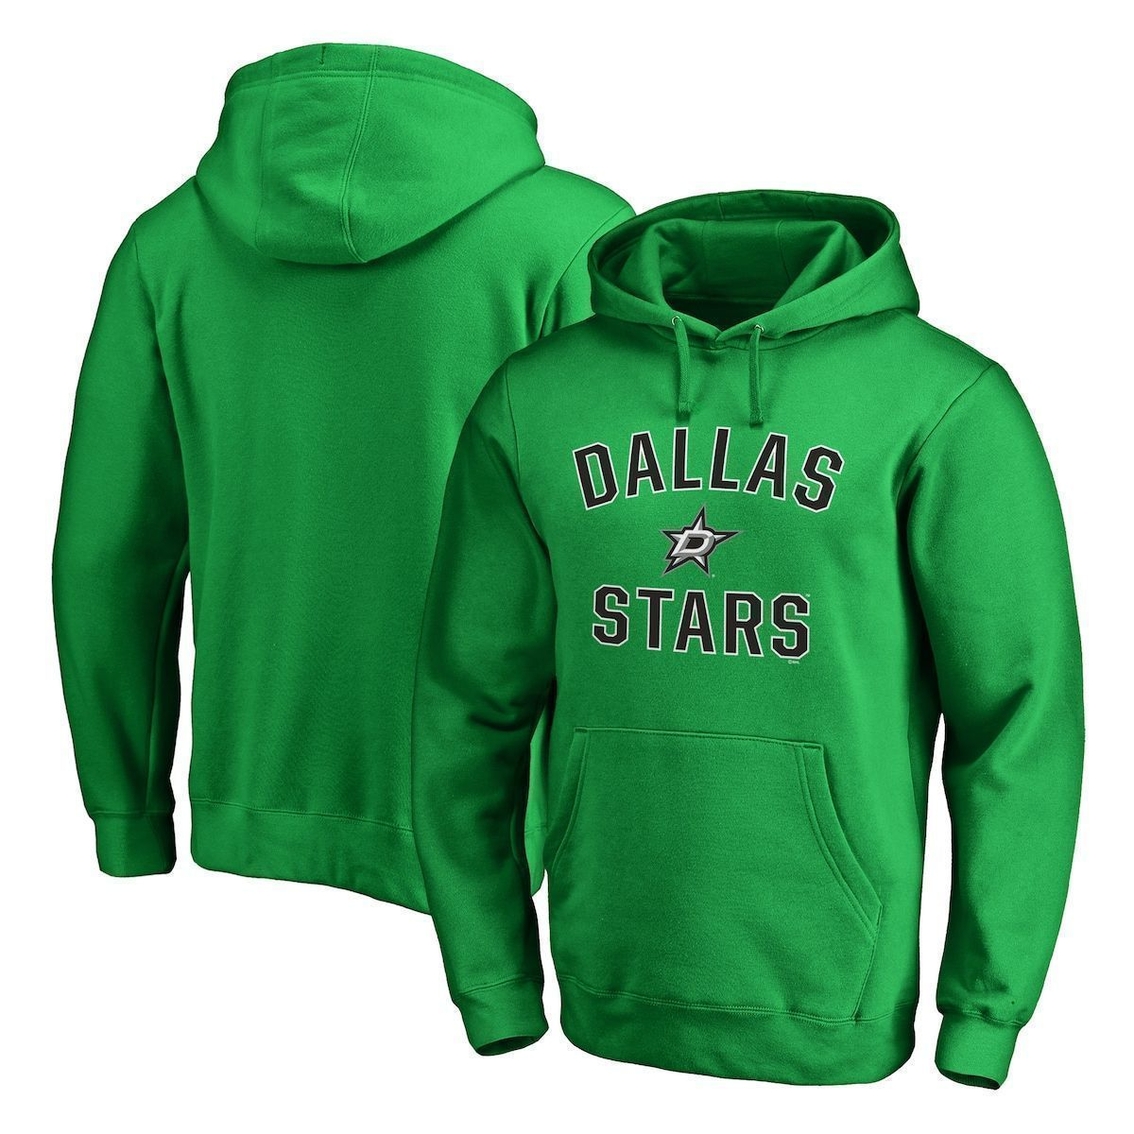 Fanatics Branded Men's Kelly Green Dallas Stars Team Victory Arch Fitted Pullover Hoodie - Image 2 of 4